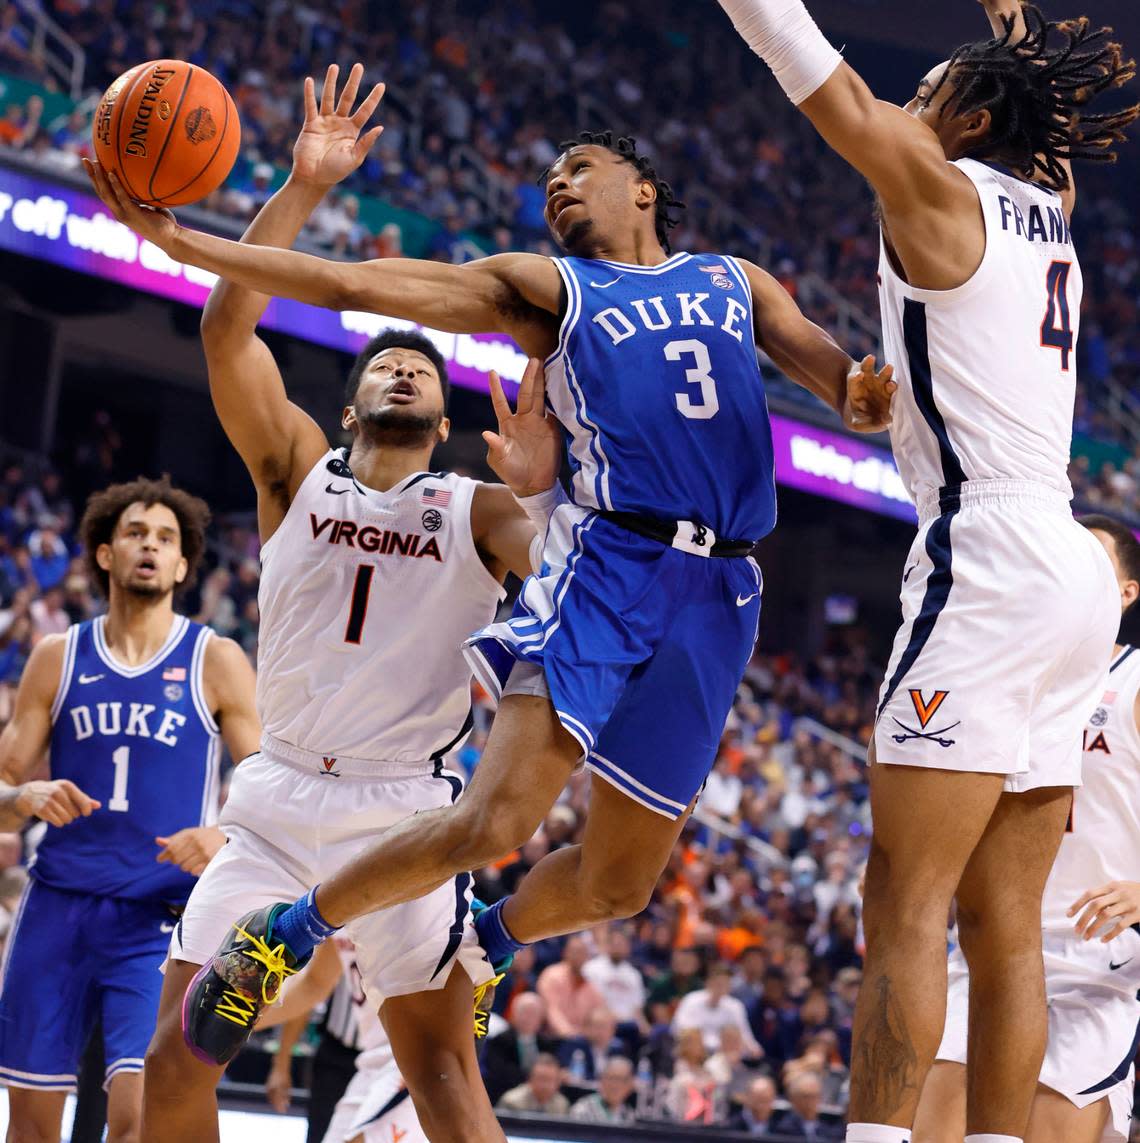 Duke’s Jeremy Roach (3) drives to the basket past Virginia’s Jayden Gardner (1) and Armaan Franklin (4) during the second half of Duke’s 59-49 victory over Virginia to win the ACC Men’s Basketball Tournament in Greensboro, N.C., Saturday, March 11, 2023.